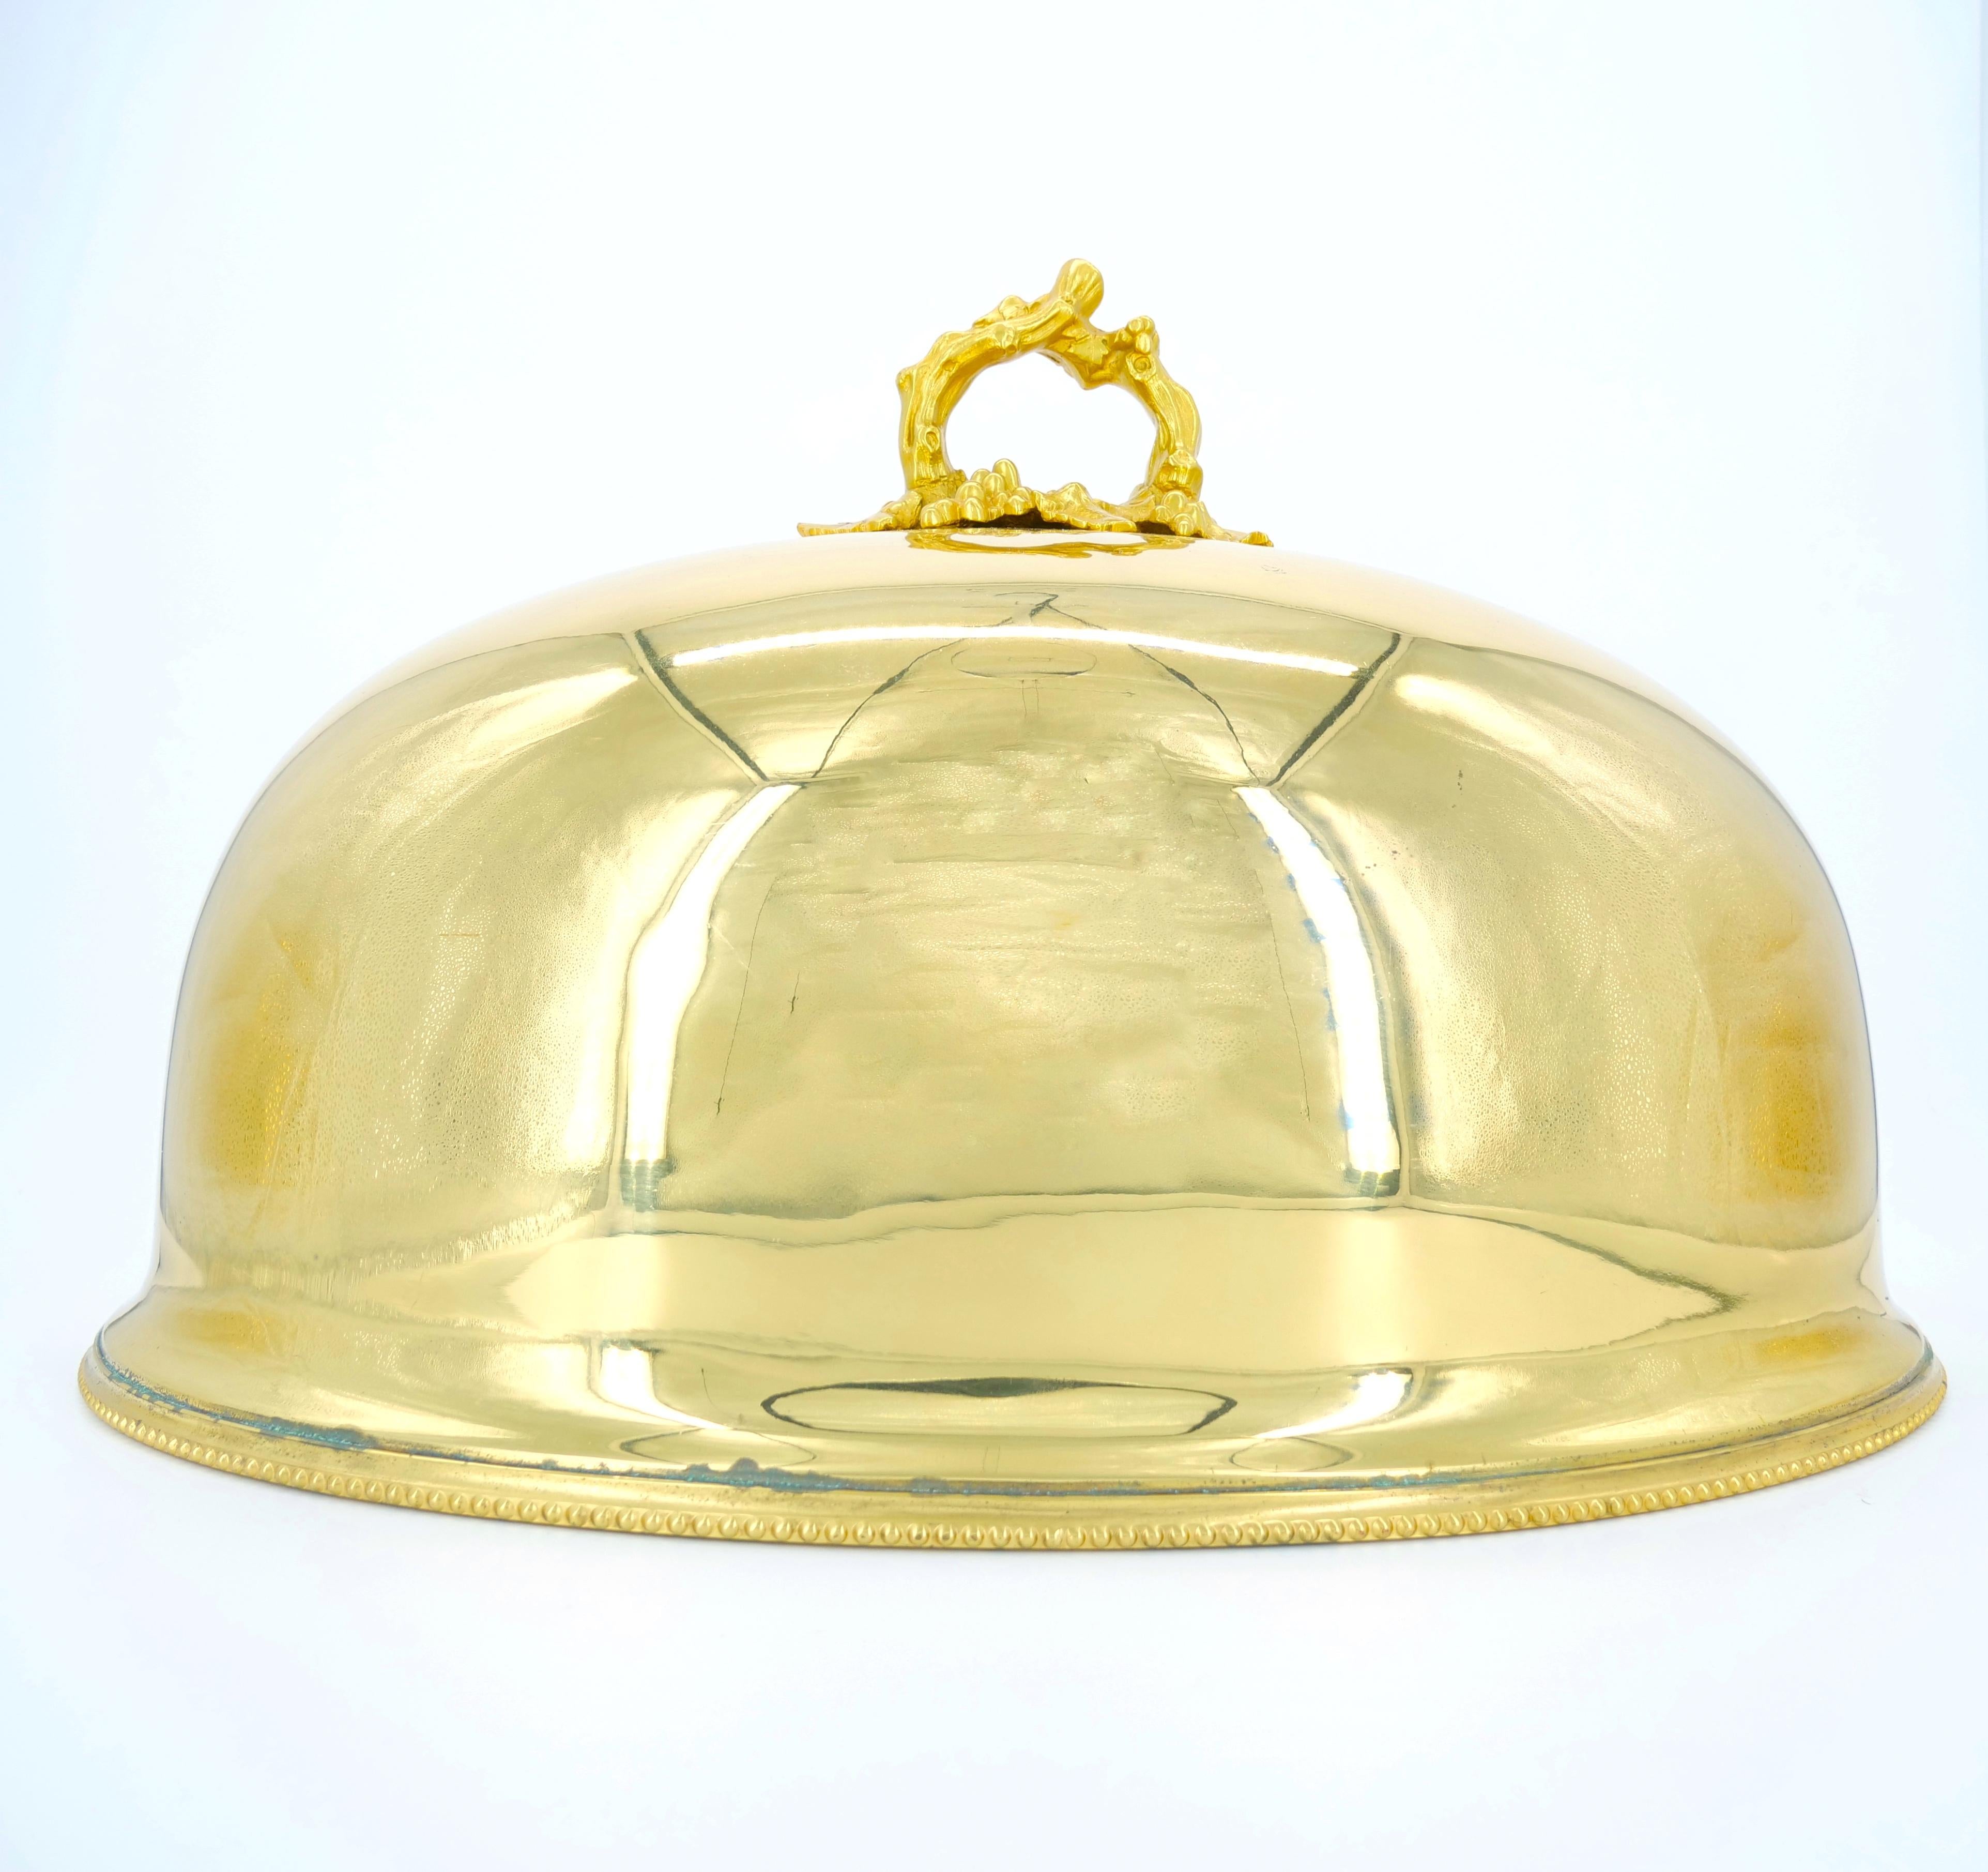 19th Century English Gilt Washed Silverplate Meat Dome by William Hutton & Sons For Sale 4